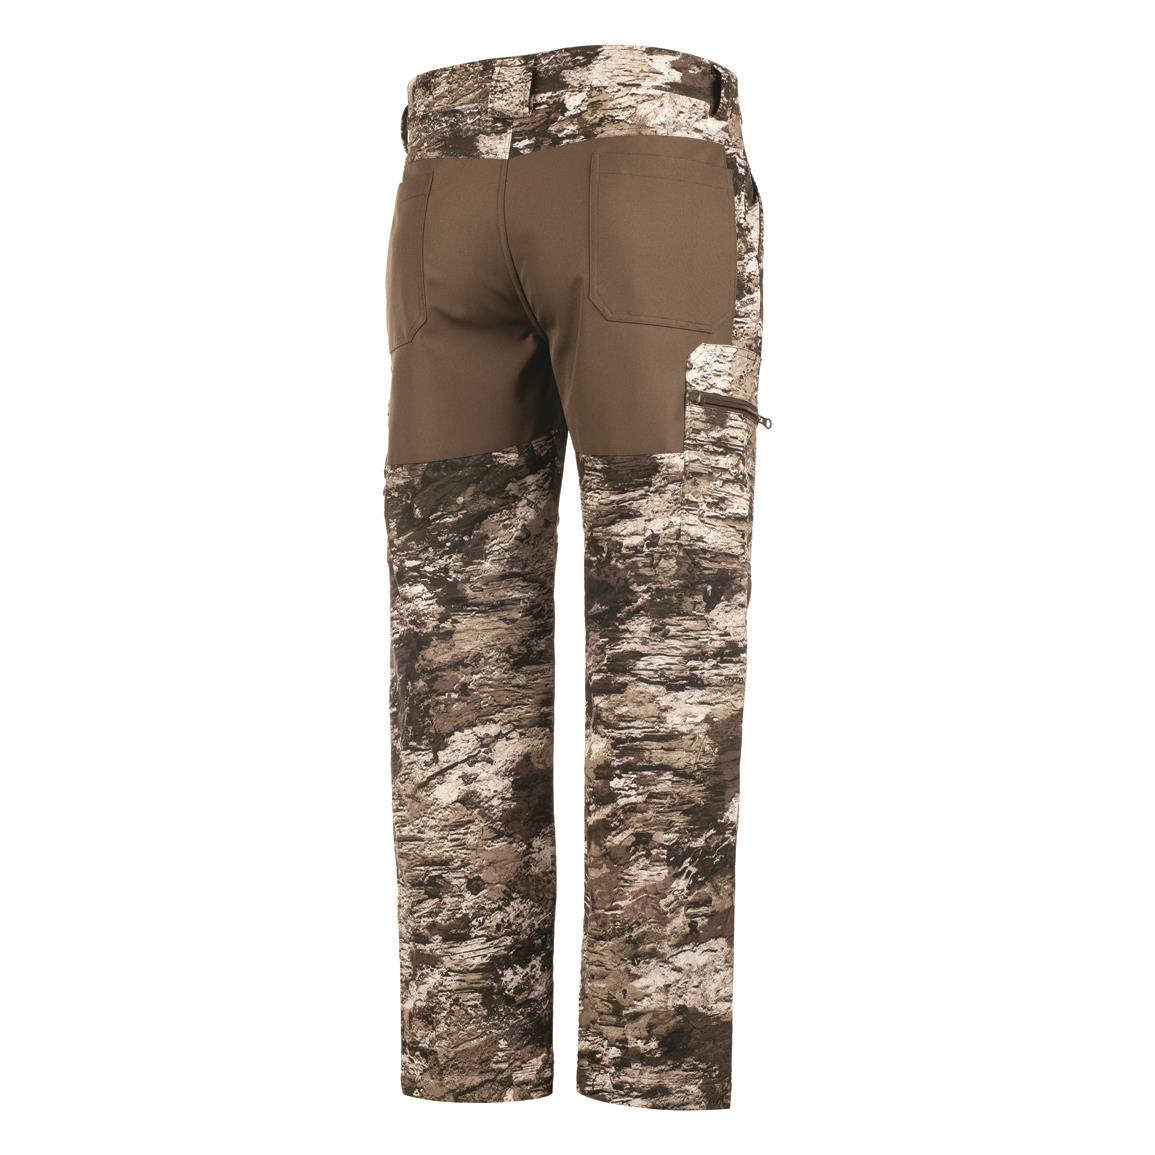 Men's Thinsulate Insulated Camo hunting Water Resistant Pants Realtree Xtra